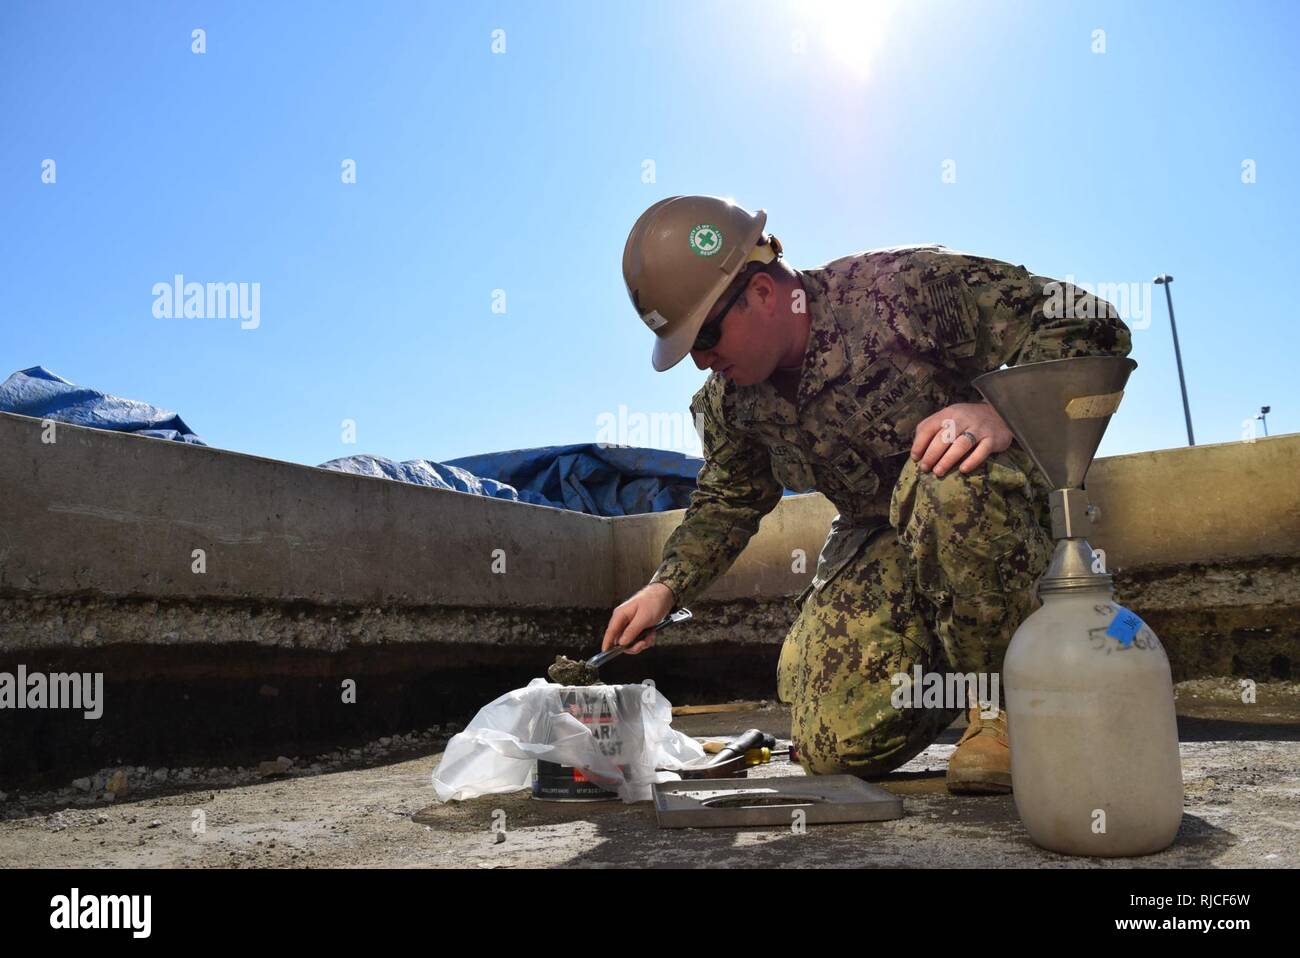 YOKOSUKA, JAPAN (Nov. 4, 2016) Petty Officer 3rd Class Aaron Miller, assigned to Naval Mobile Construction Battalion (NMCB) 5, checks soil for compaction prior to constructing a shade structure. The project will provide a 6,000 square foot shaded pavilion for Morale, Welfare, and Recreation on board Commander, Fleet Activities Yokosuka. The pavilion will be used for outdoor workouts and special events improving the base amenities and lifestyle for the Sailors there. NMCB 5 is the forward deployed Western Pacific NMCB ready to support major combat operation and Humanitarian Assistance, disaster Stock Photo